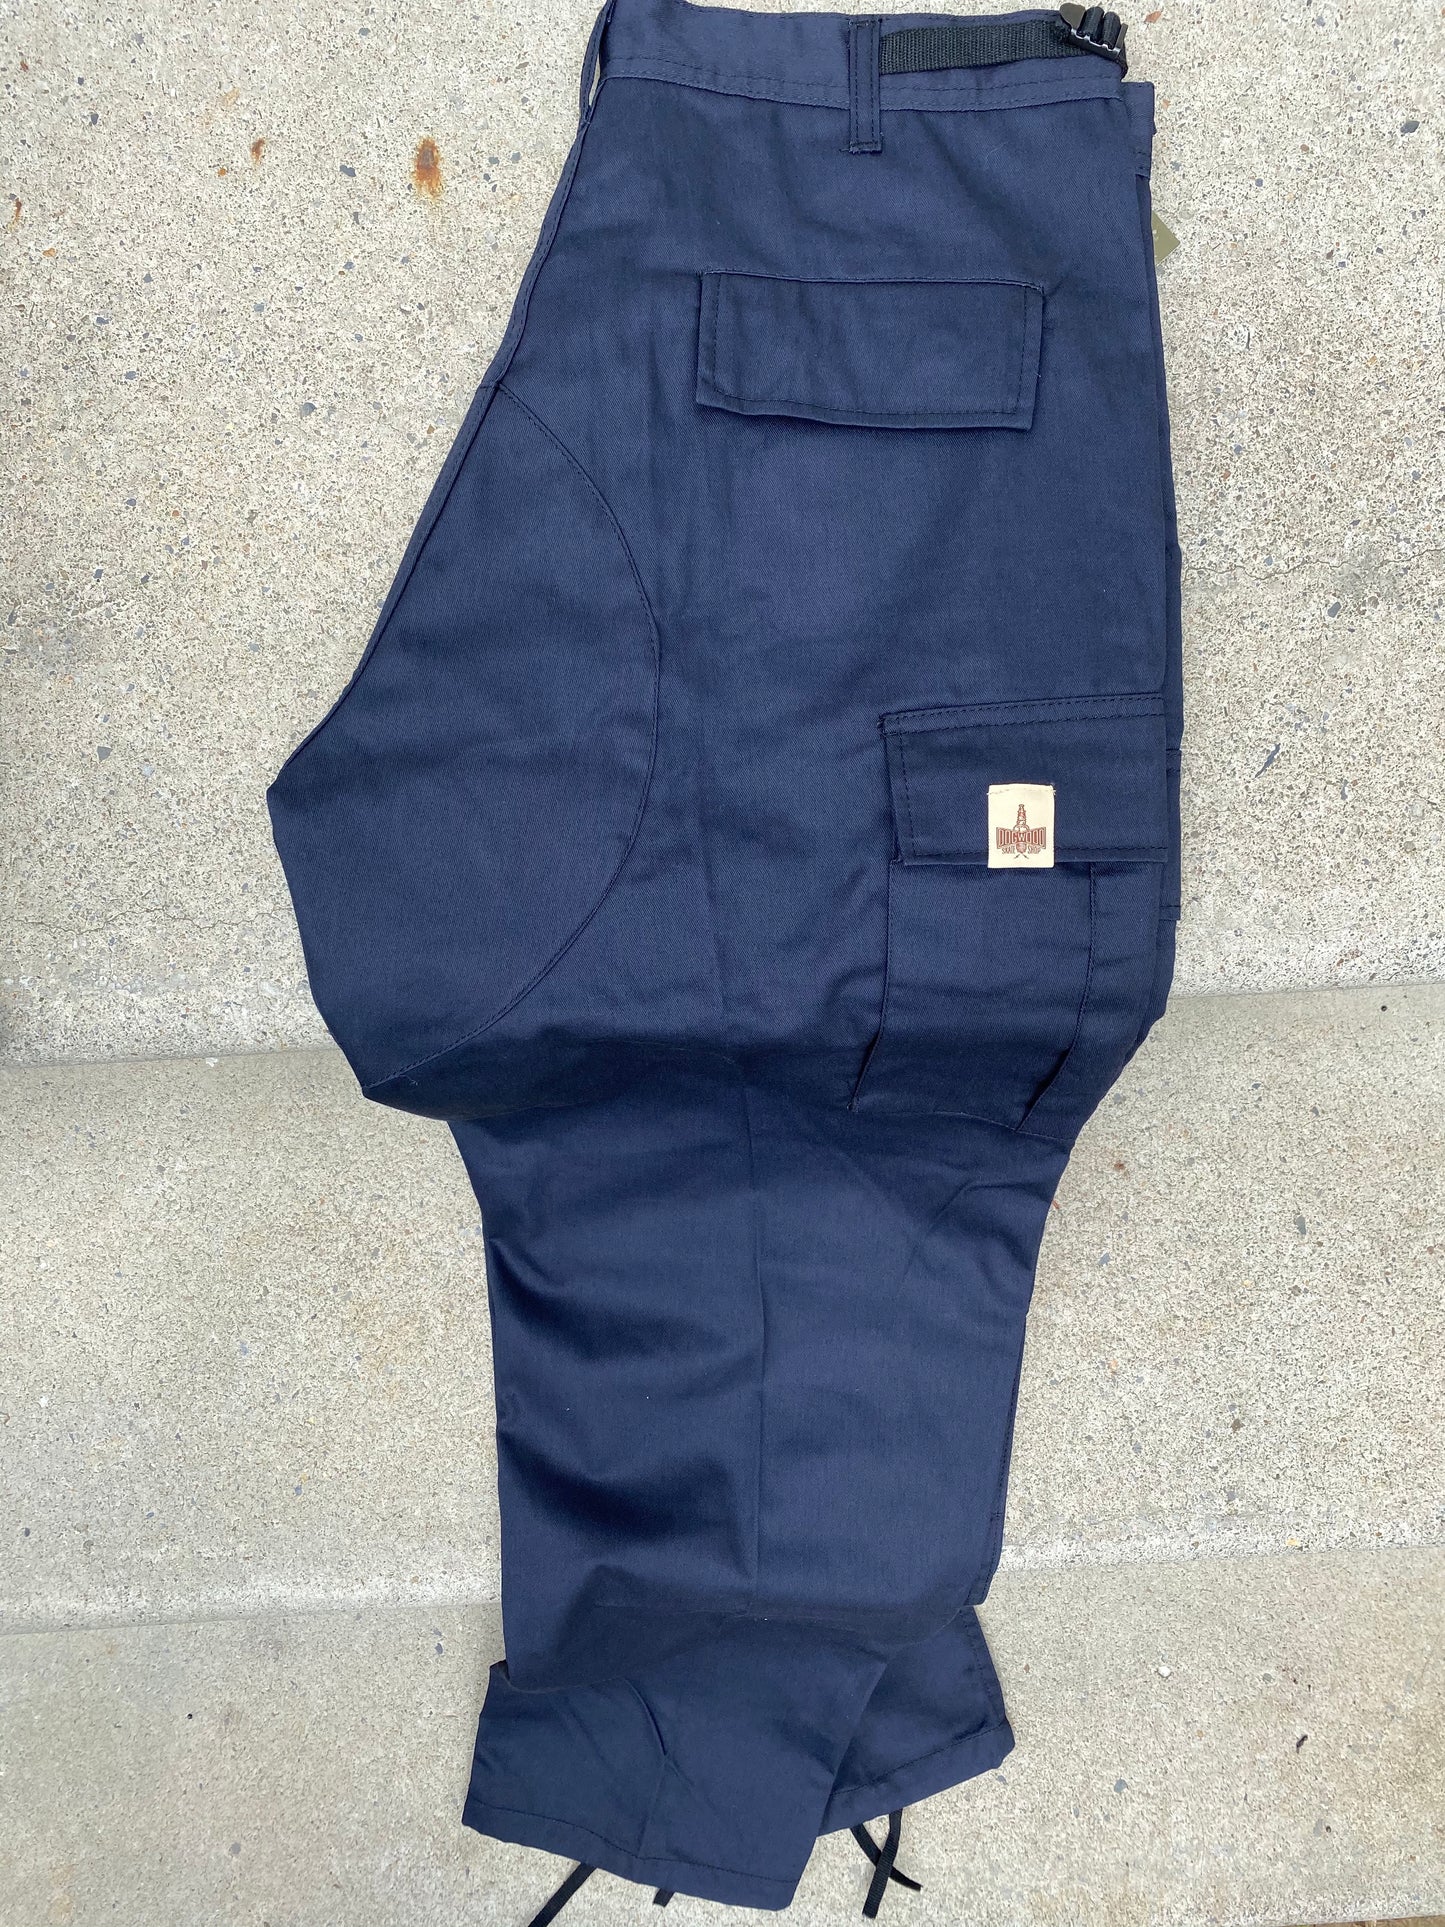 Plug Bdu Cargo Pants Dk. Midnight Nvy Blu/Tag Color Assorted (size options listed)